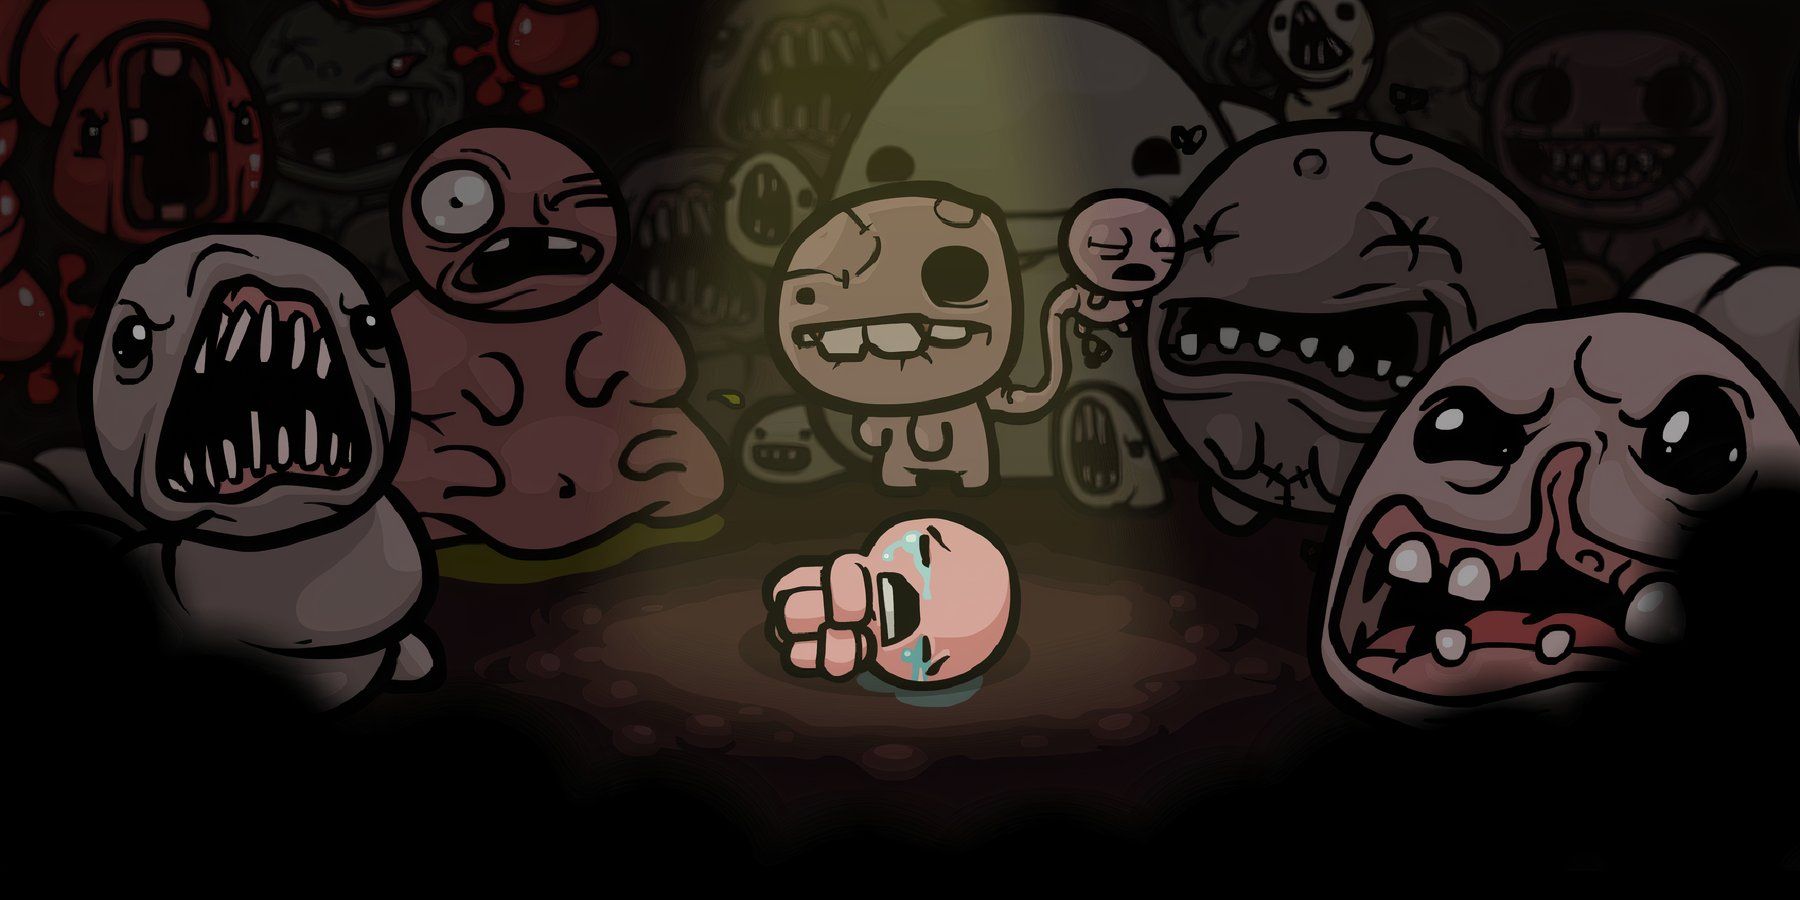 Isaac scared and crying of horrifying creatures around him